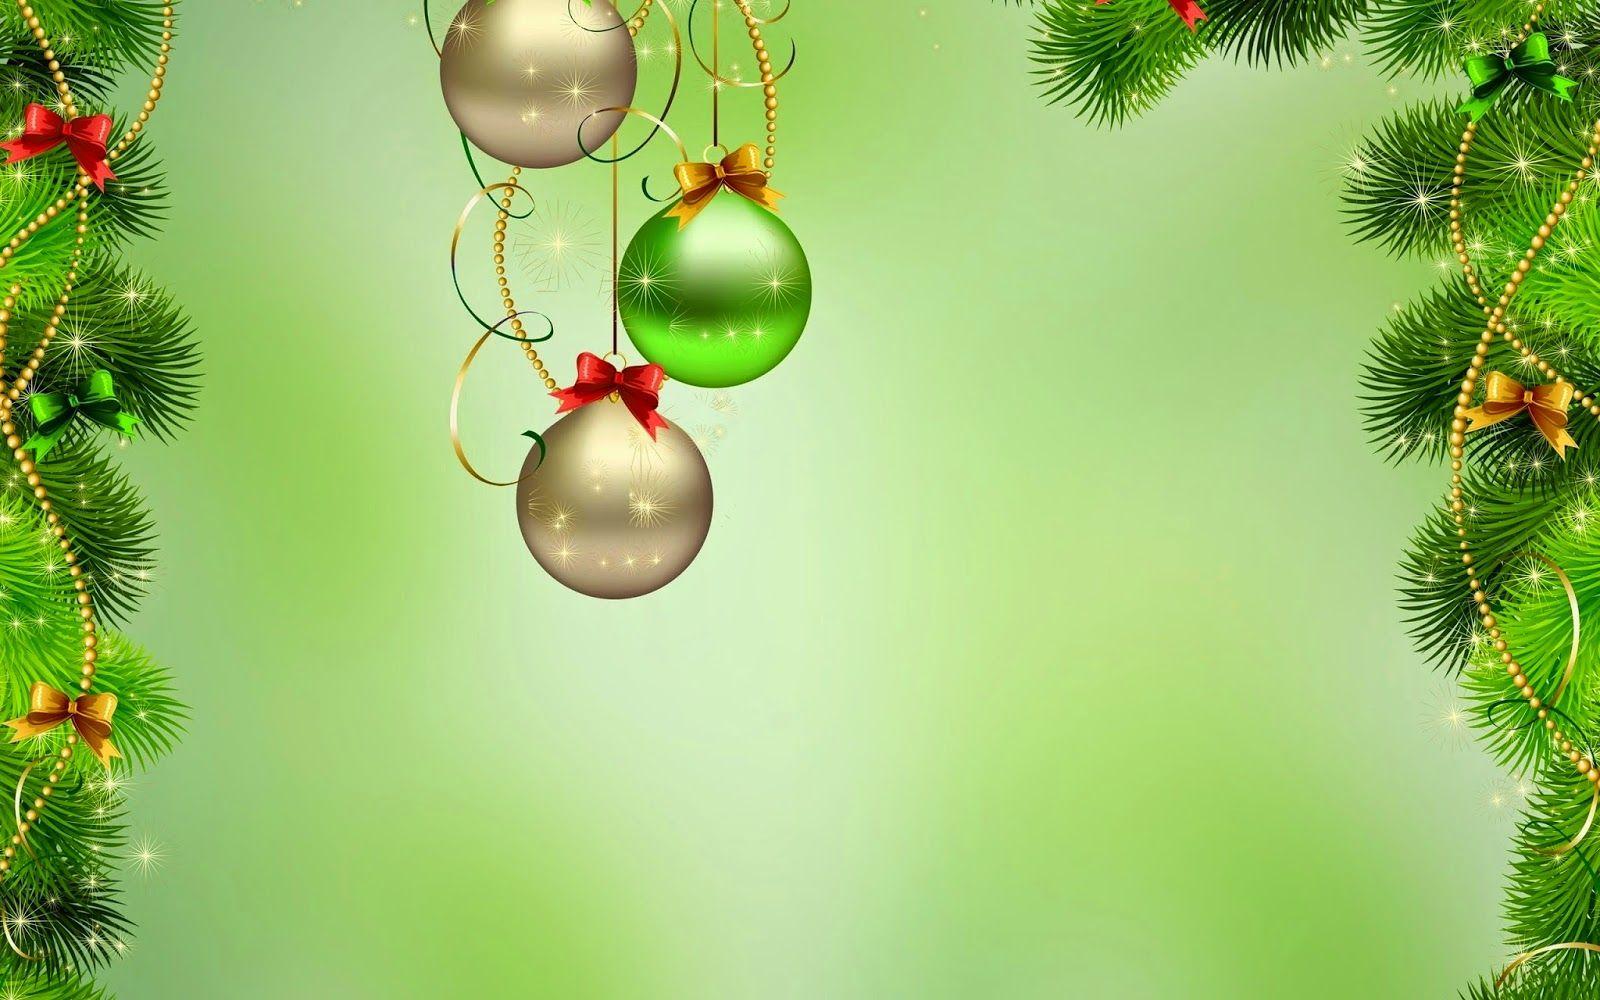 Wallpaper Christmas Themes Background